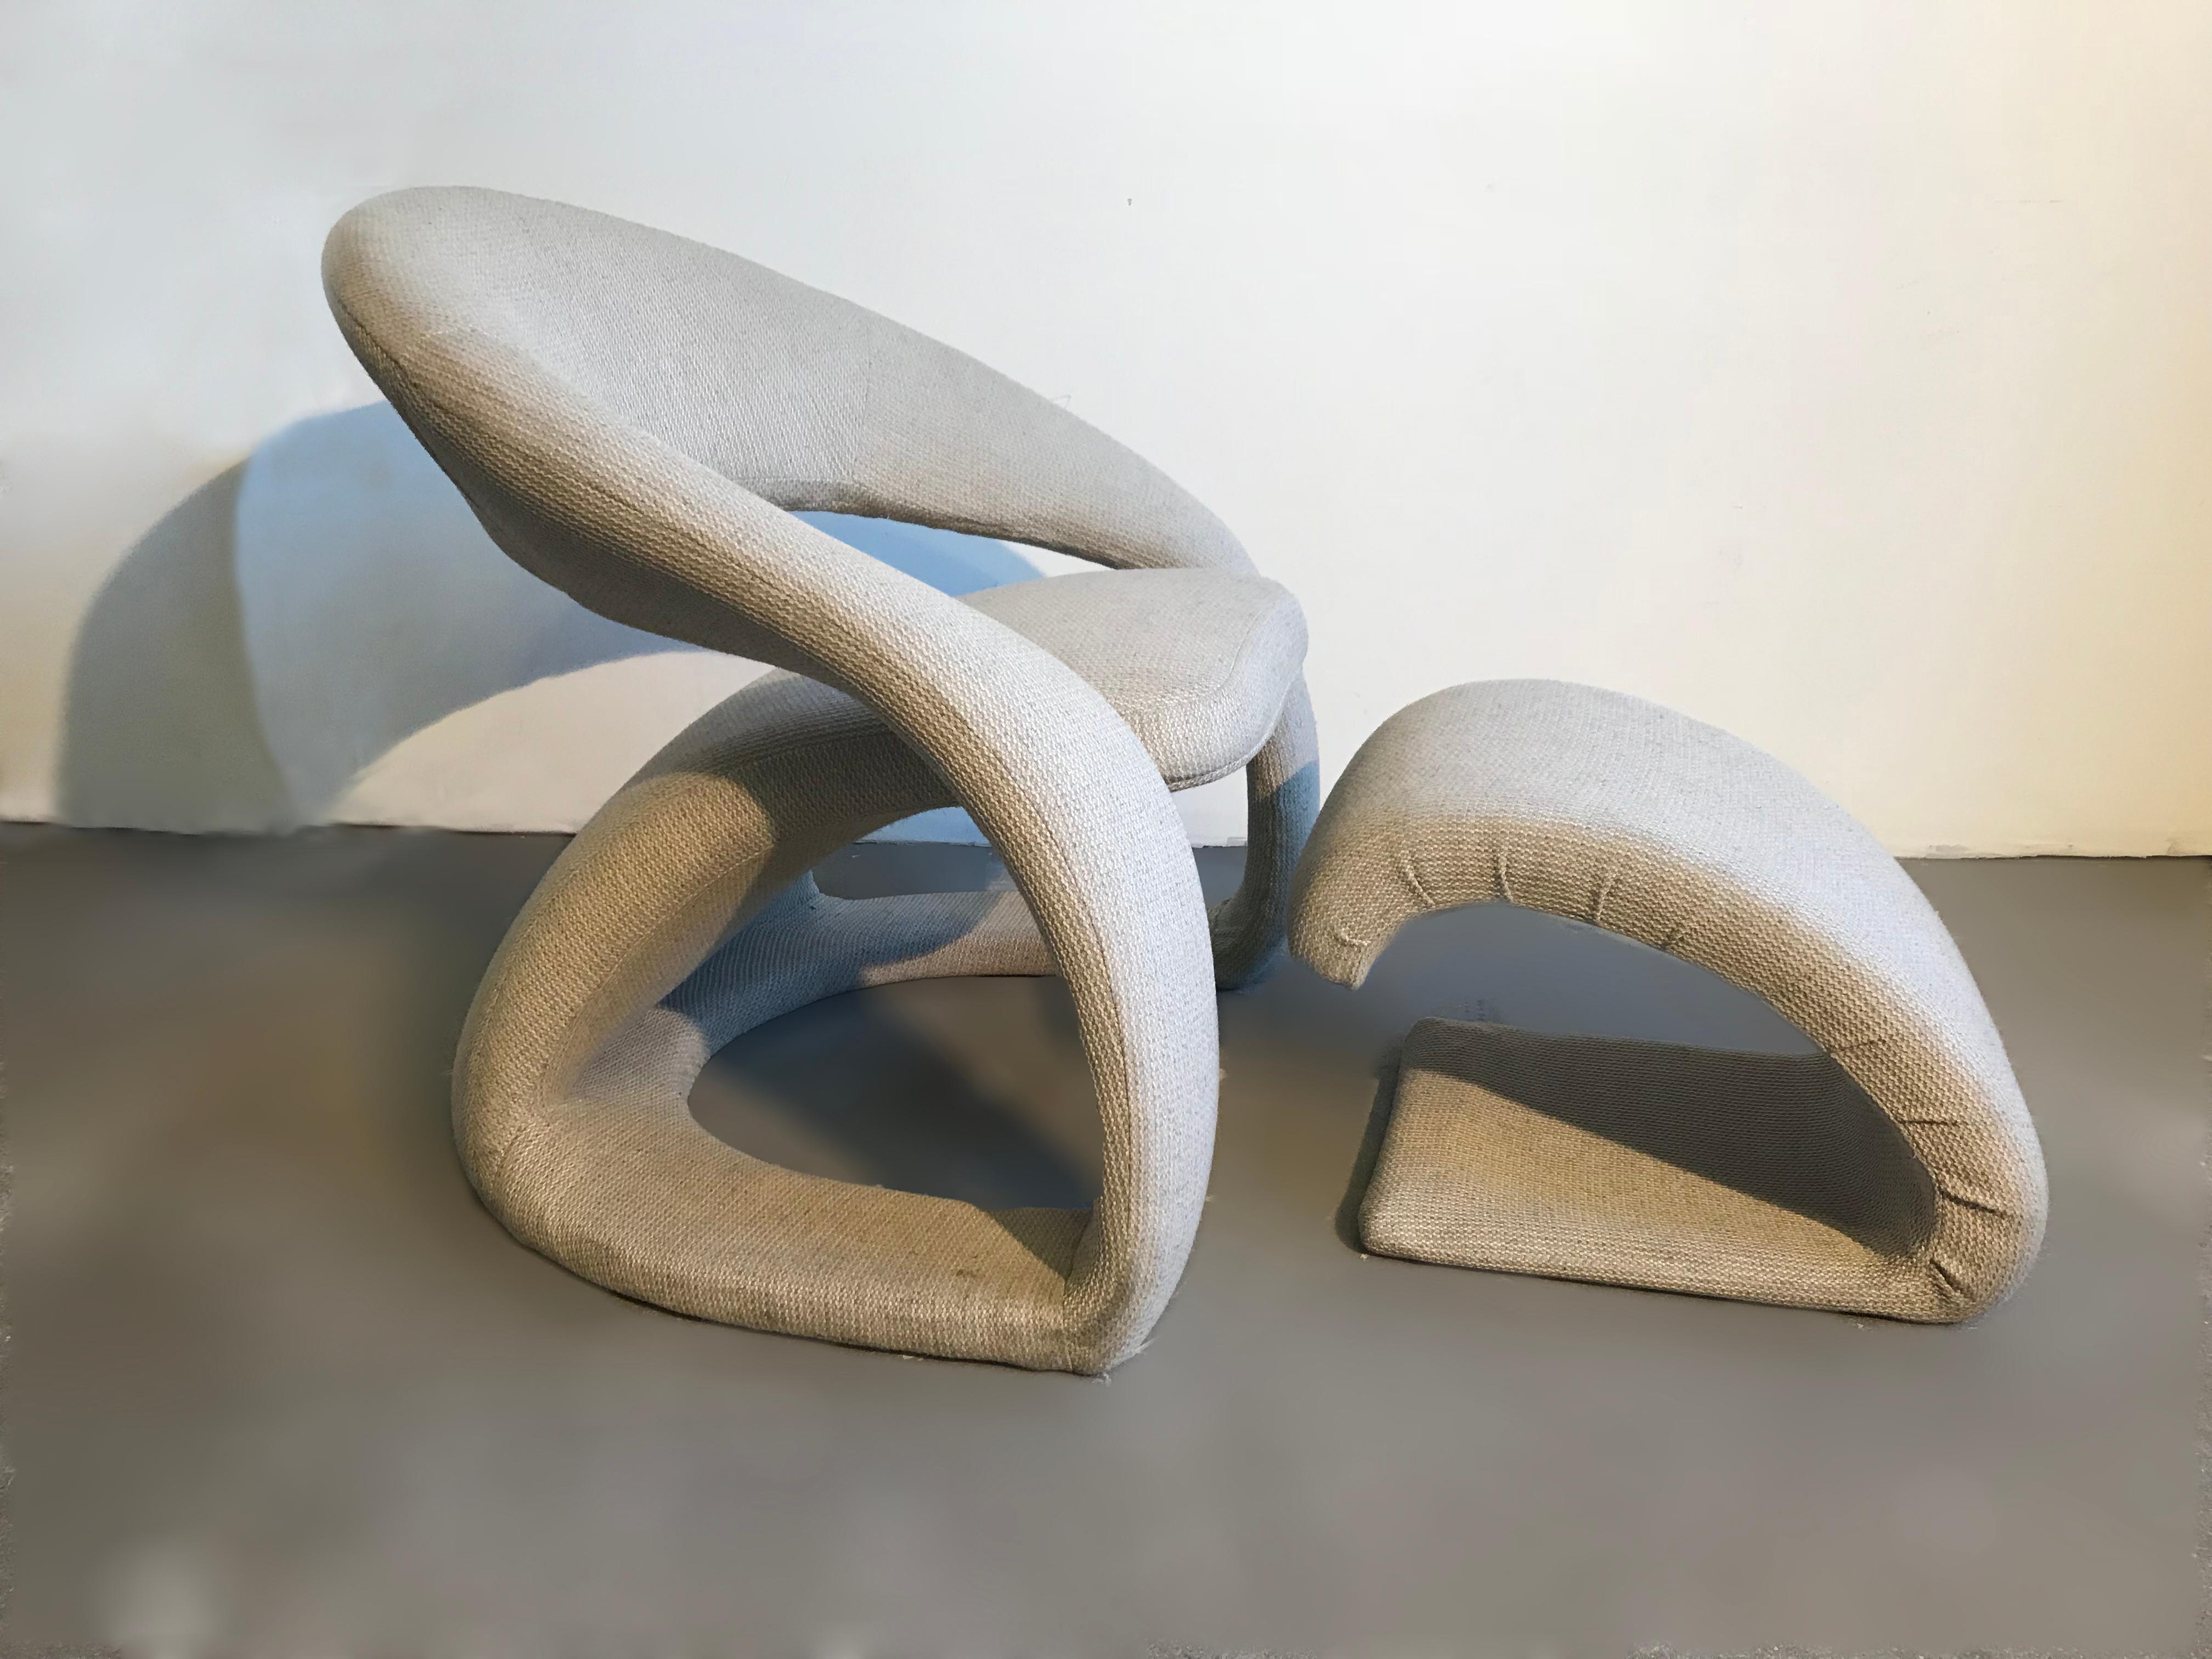 One-of-a-kind chair and ottoman, in a 'Z' and 'C' shape. Both are upholstered in a heather tweed fabric. A very comfortable unique set, inspired by Joe Colombo shapes, an Italian furniture designer in the 1960s and 1970s
Seat: W 19.5